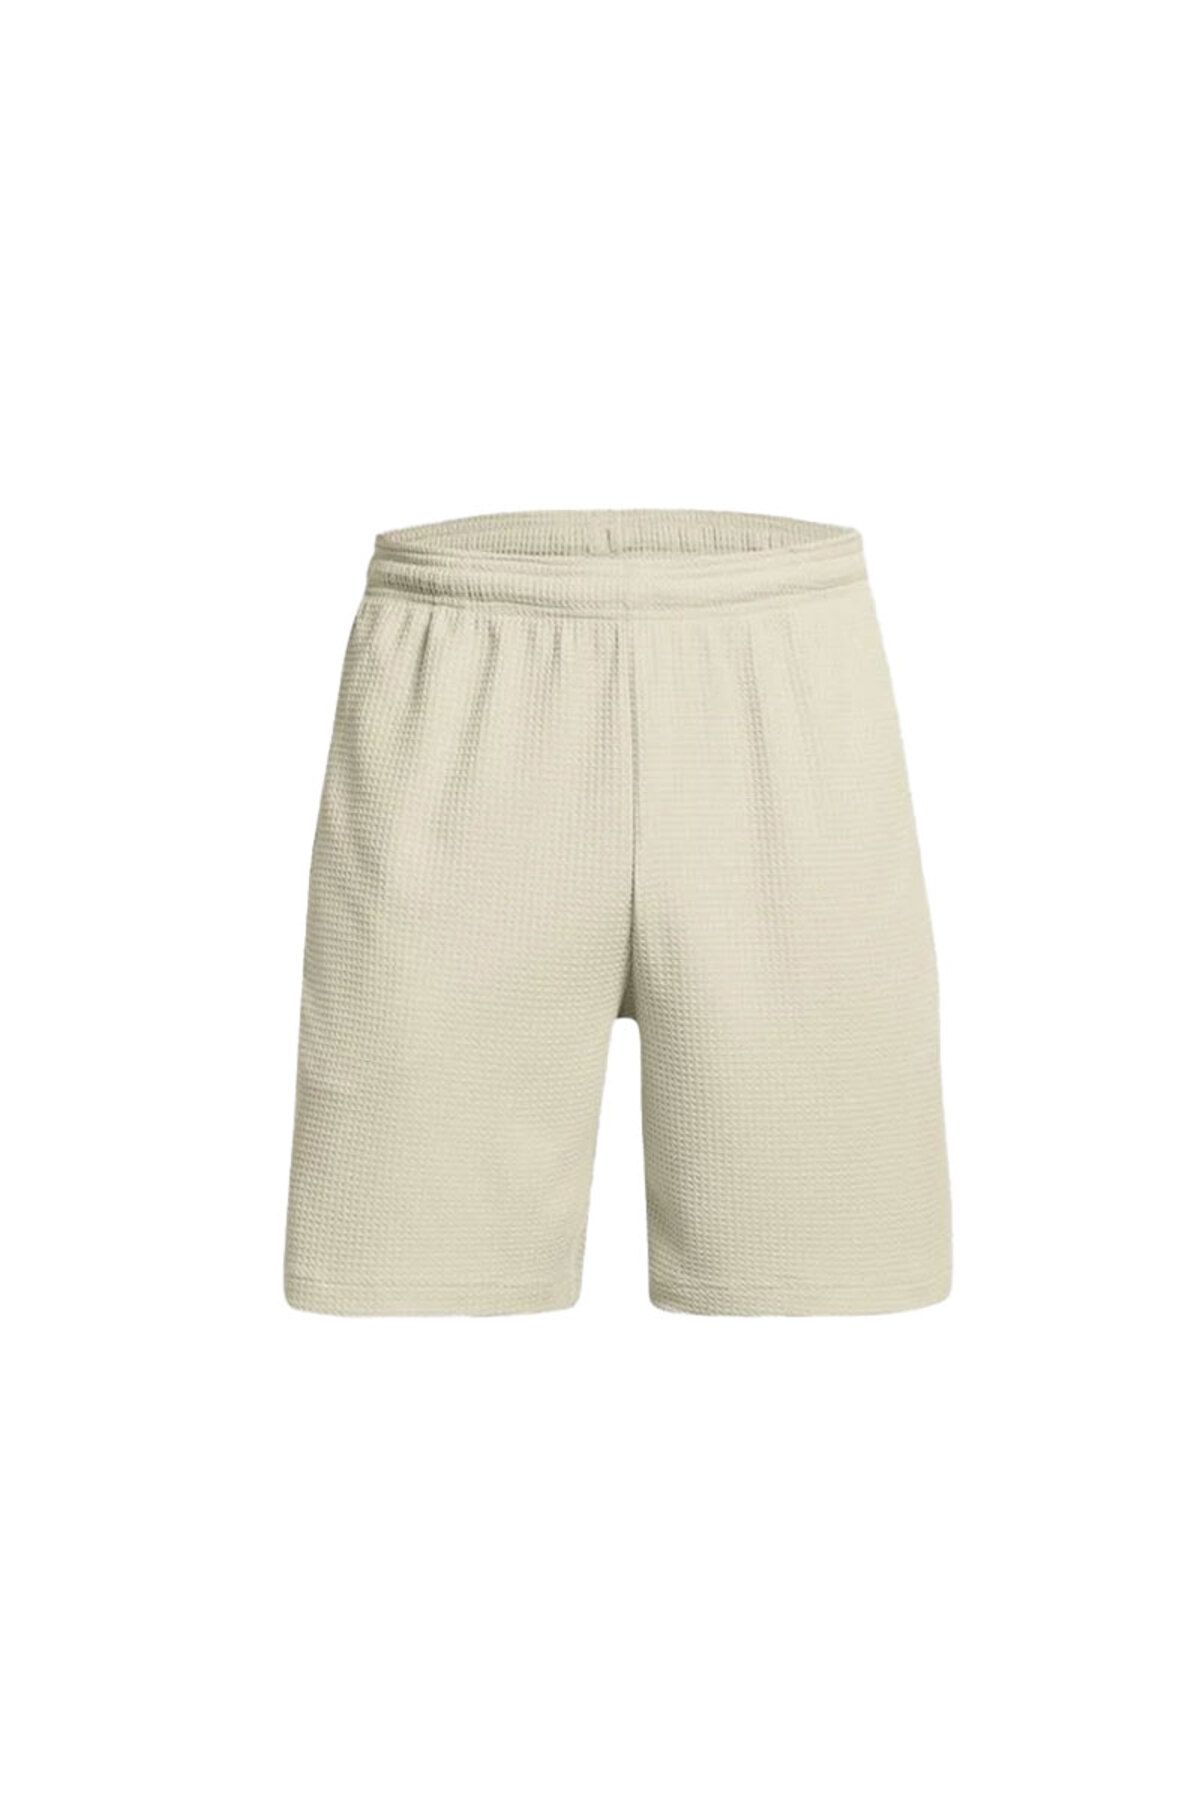 Under Armour Ua Rival Waffle Short